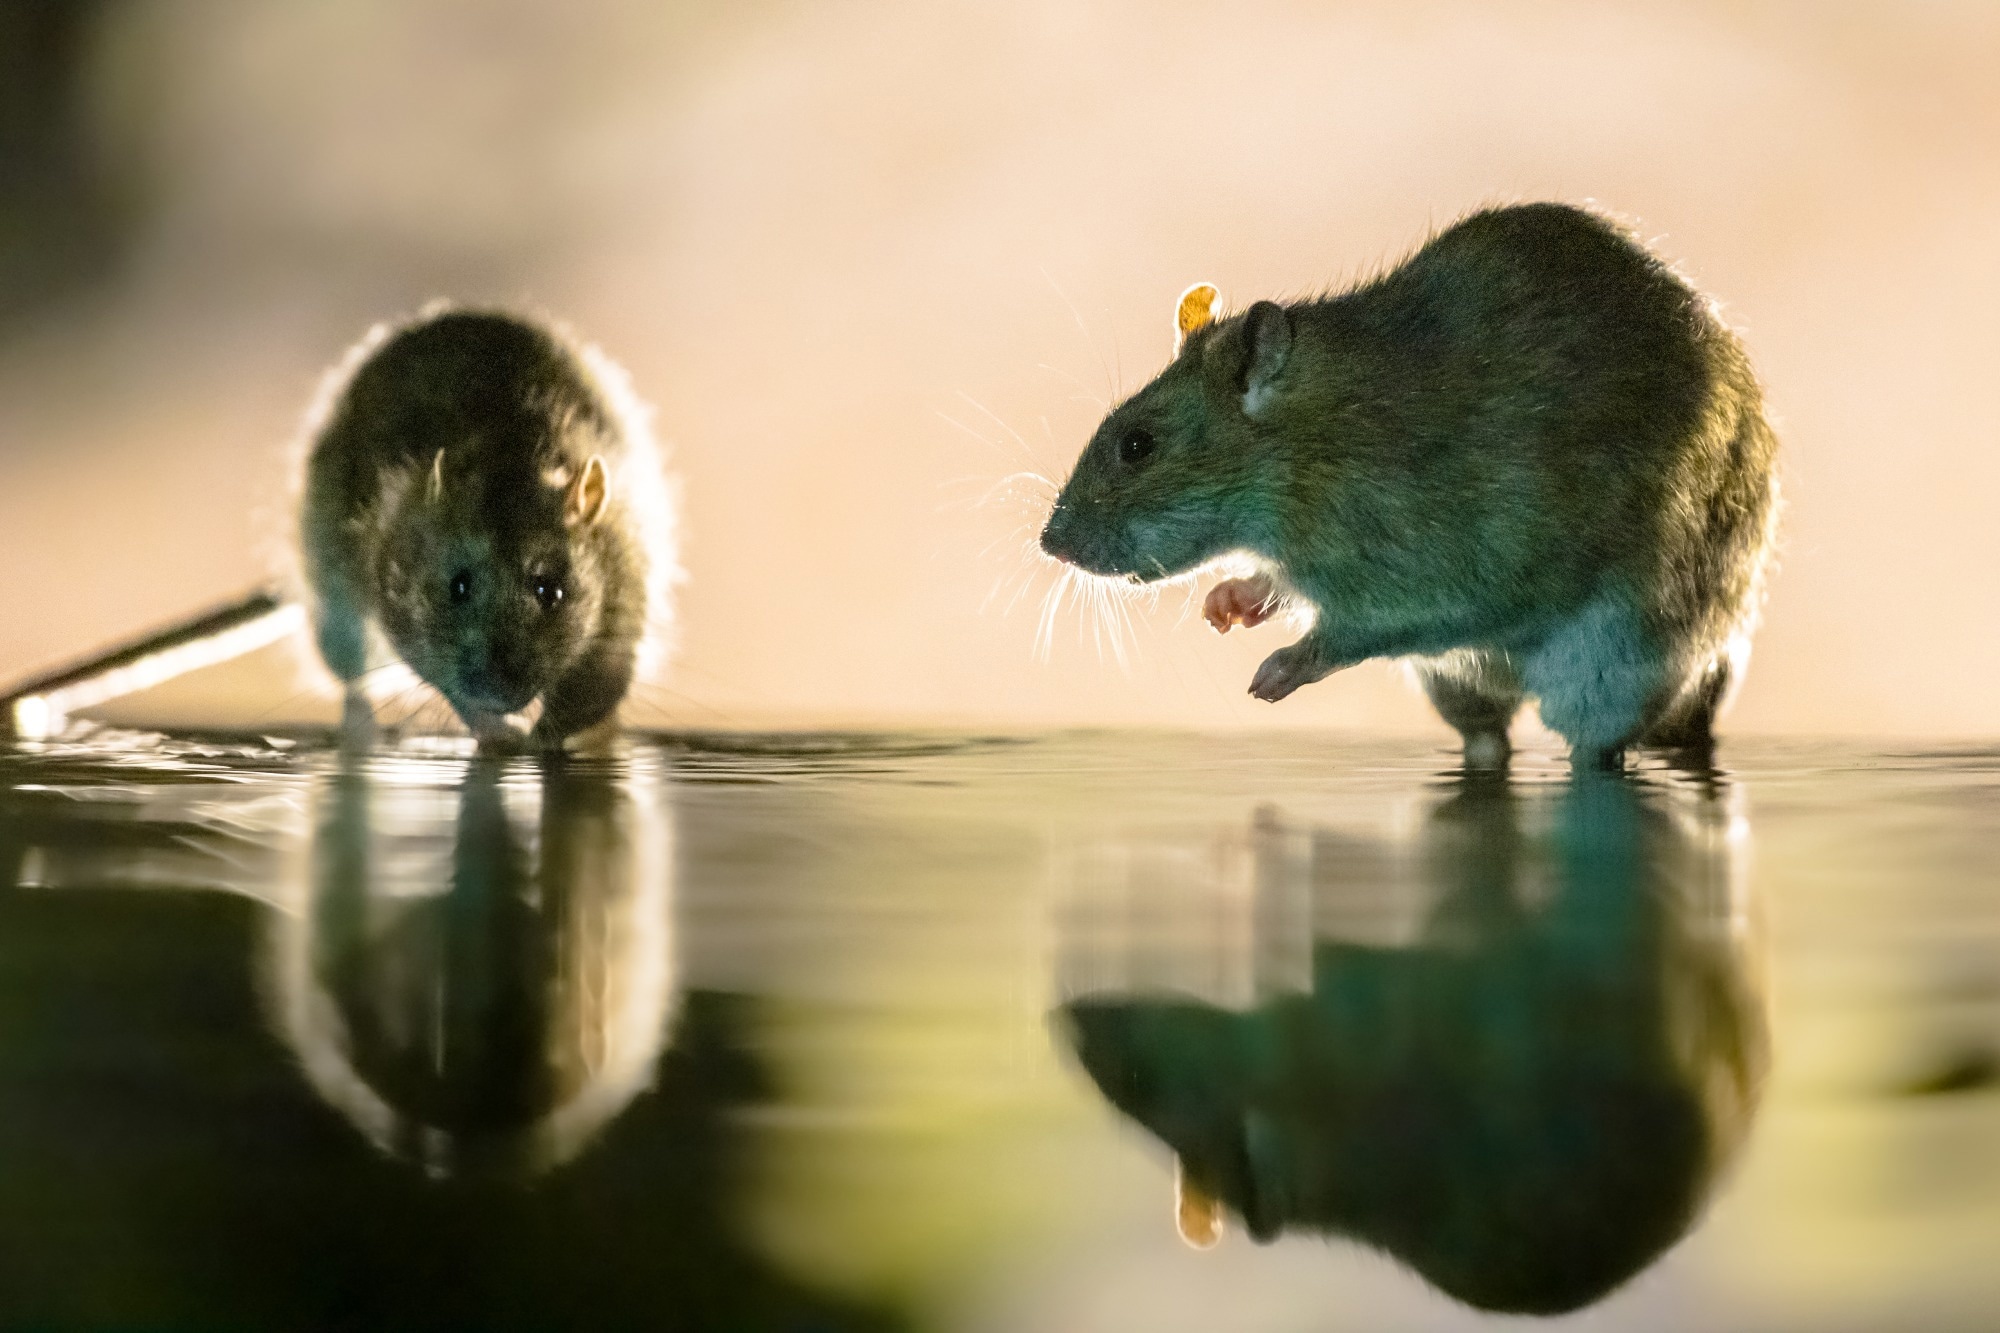 Study: The Ecology of Viruses in Urban Rodents with a Focus on SARS-CoV-2. Image Credit: Rudmer Zwerver / Shutterstock